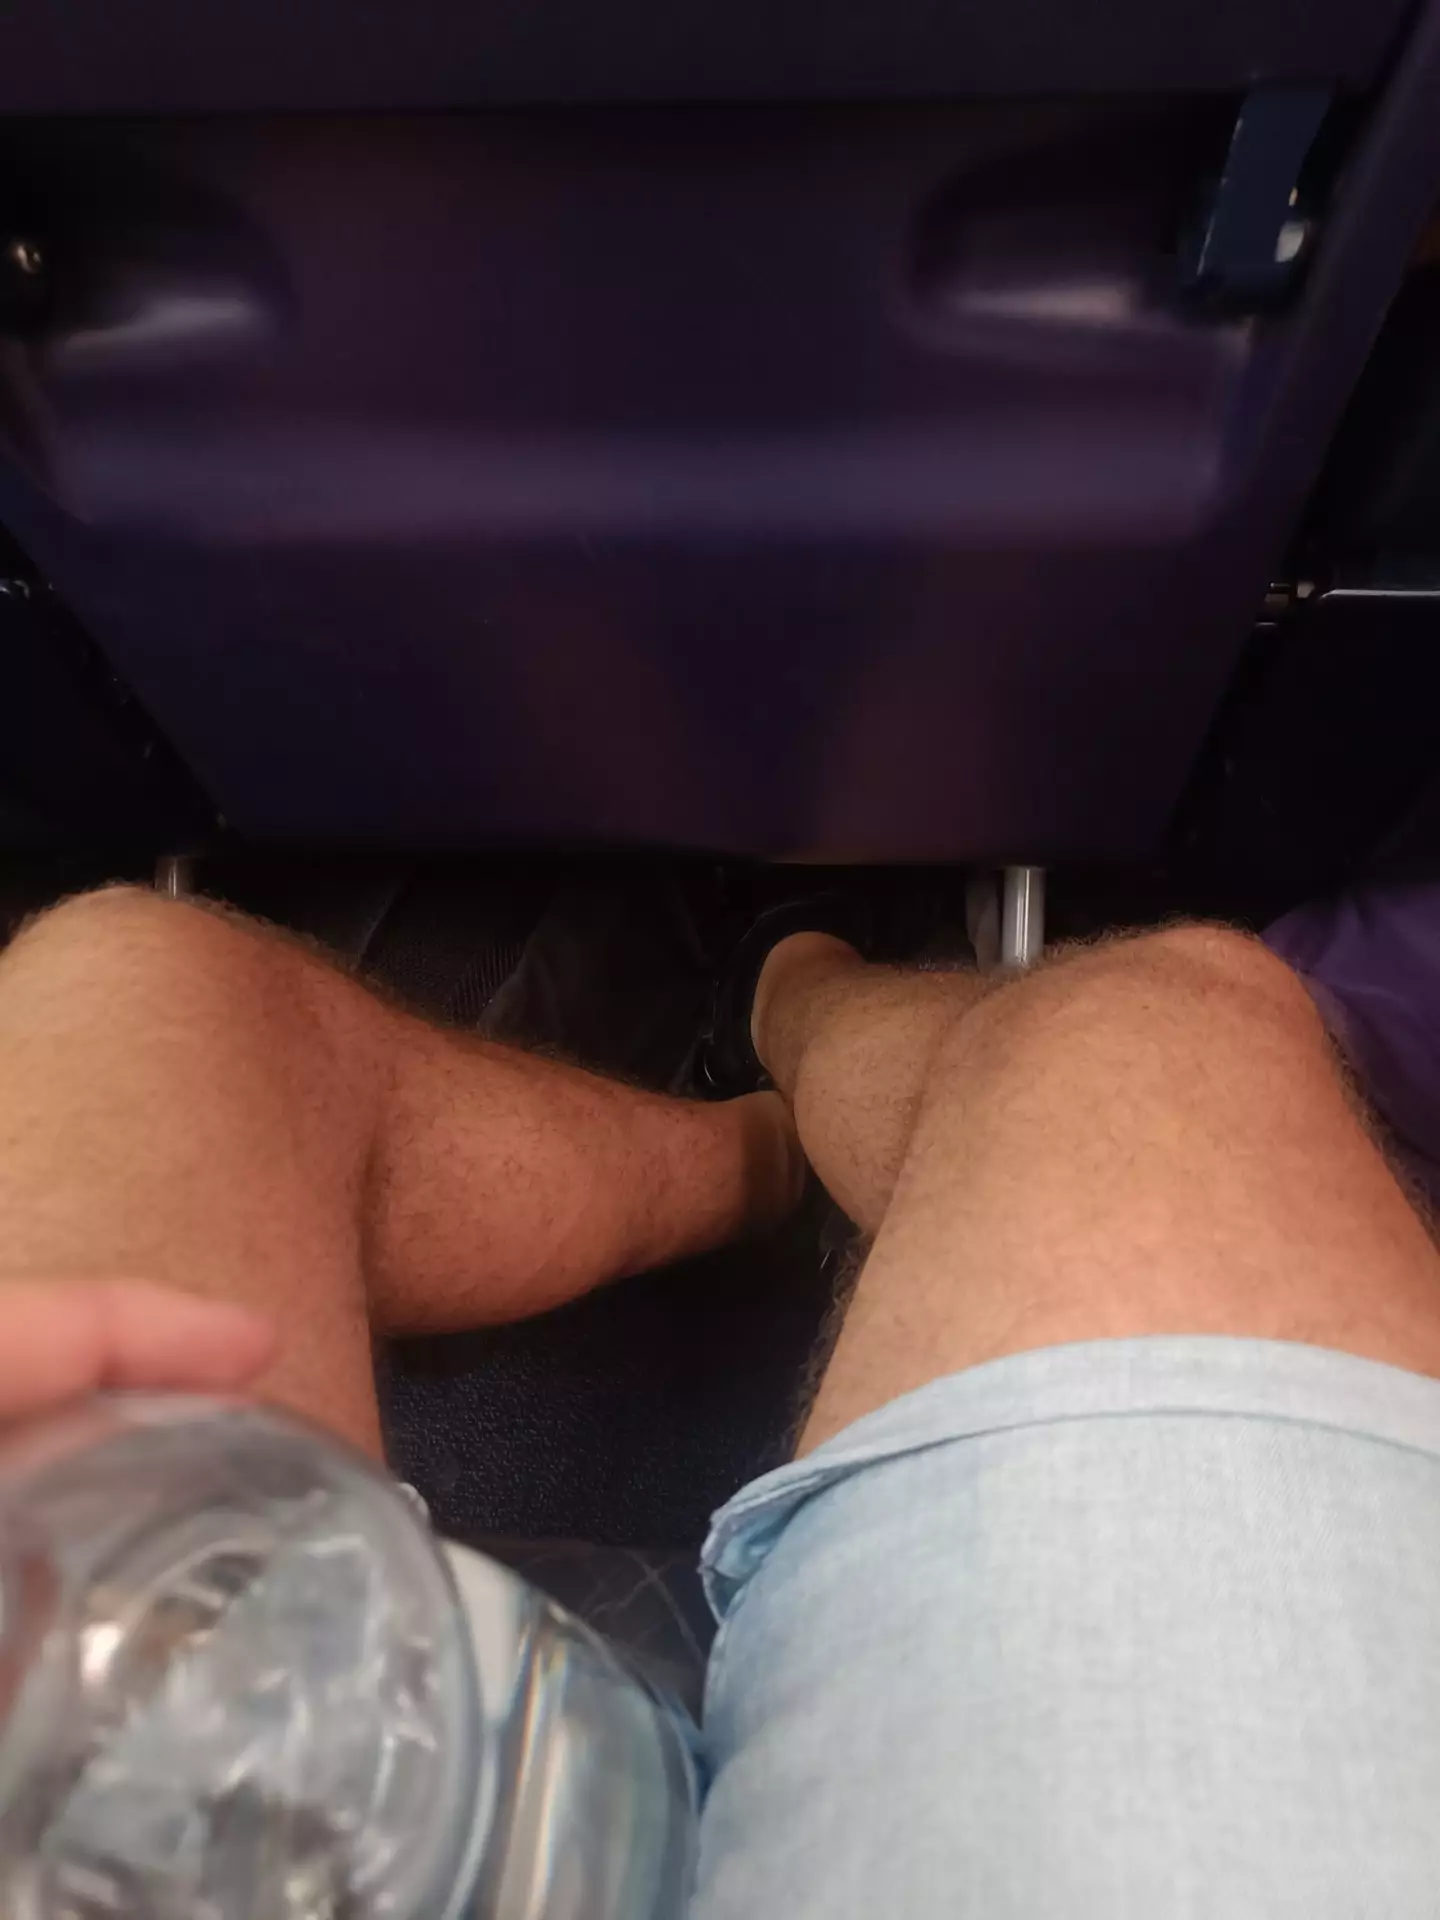 Ryanair's admin is at it again with an absolute savage response to a passenger complaining about the lack of legroom.